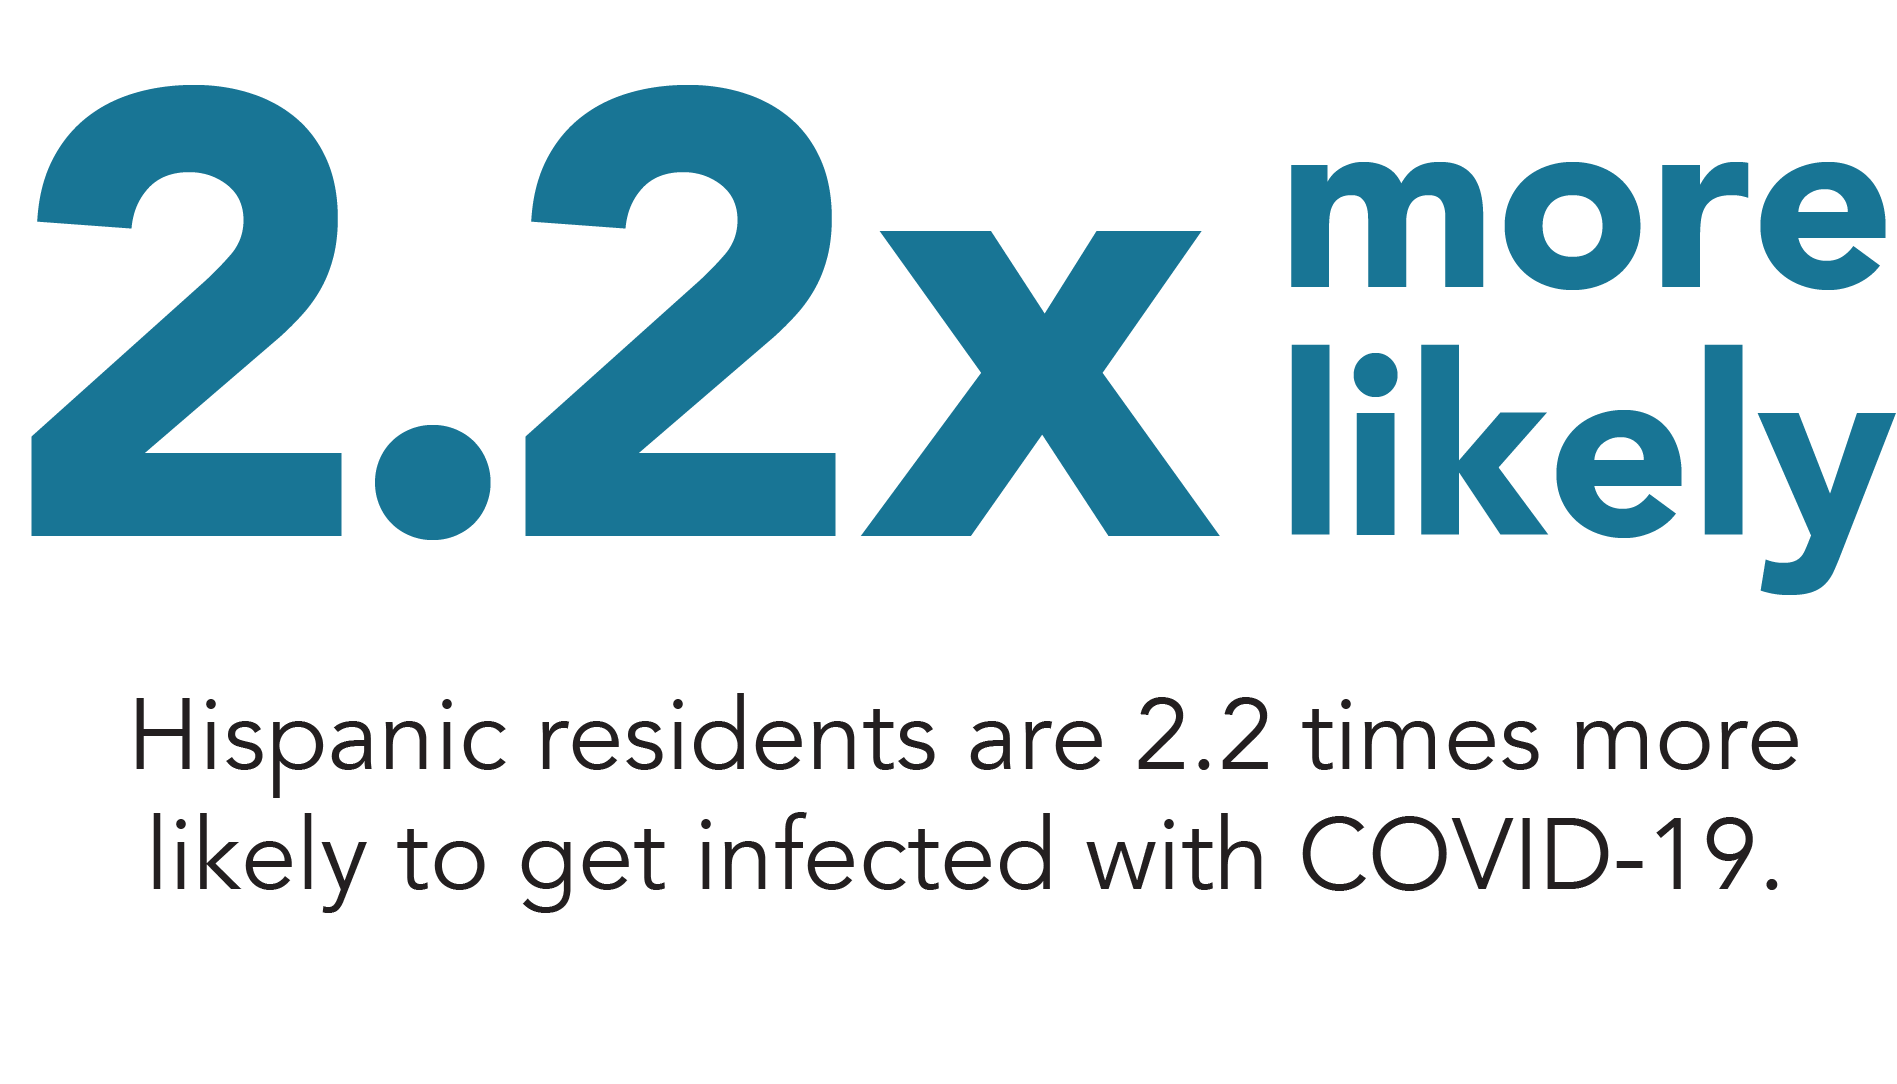 Hispanics are 2.2 times more likely to get infected with covid 19?